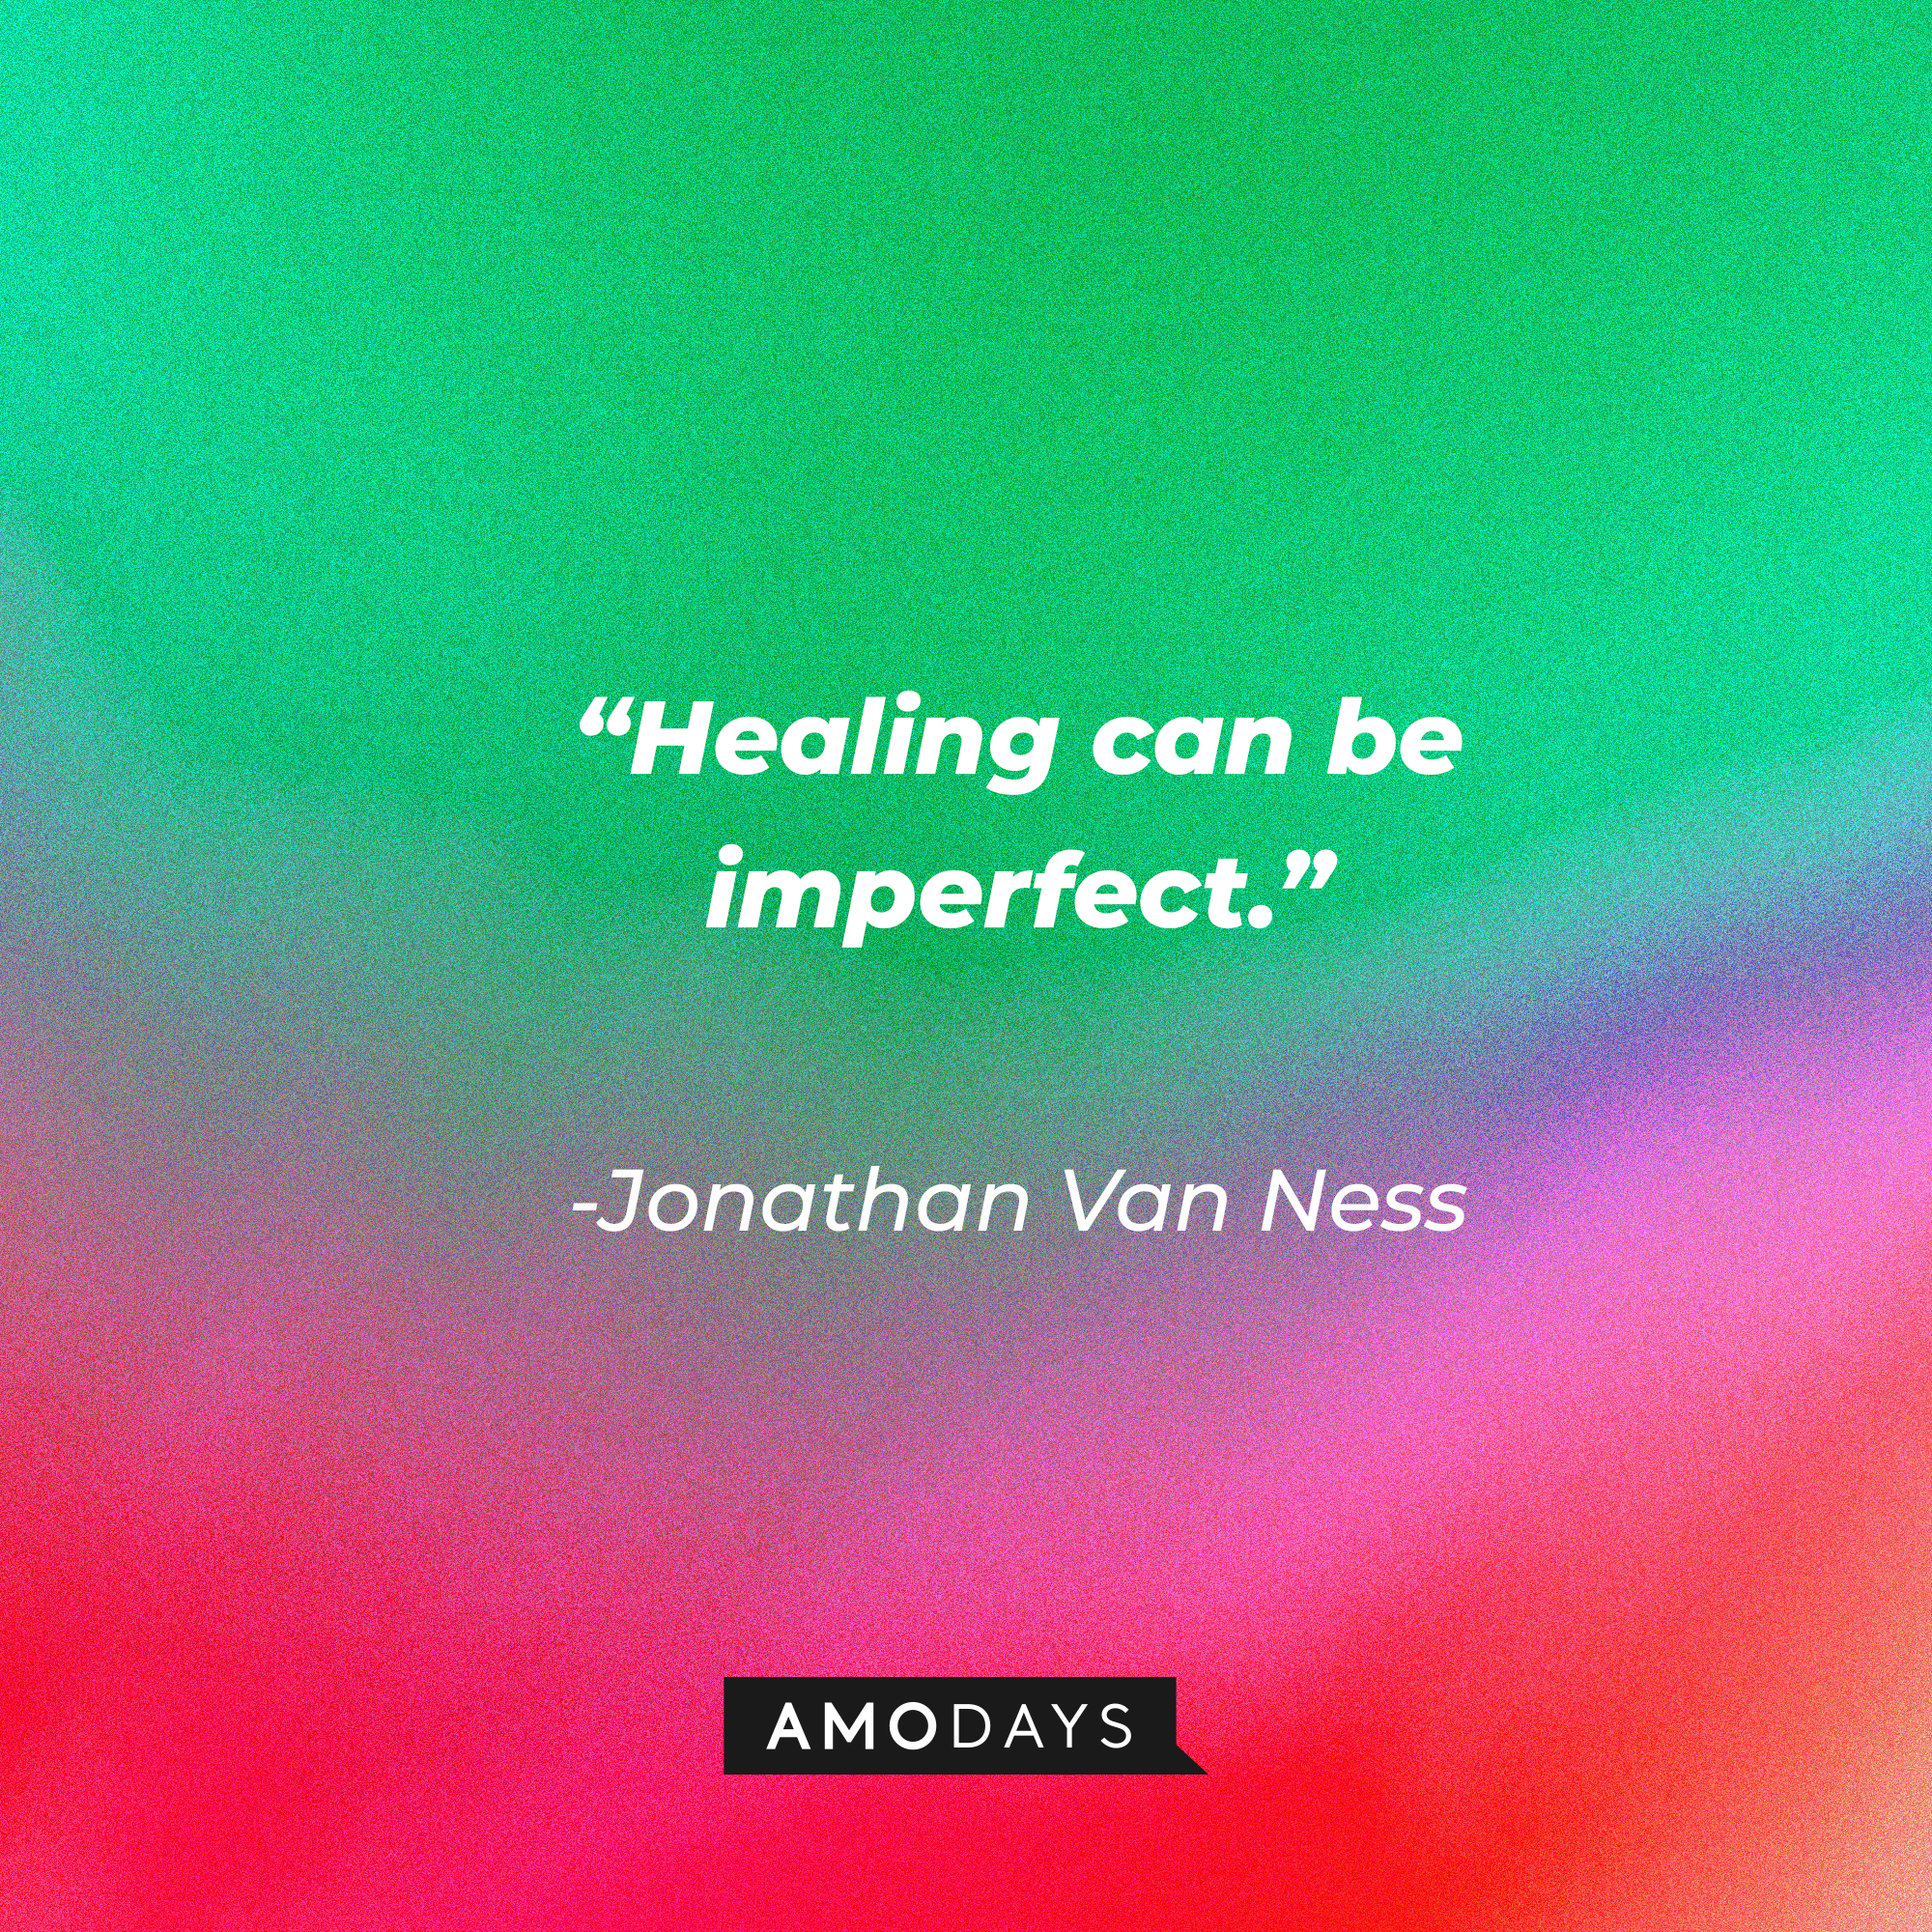 Jonathan Van Ness’s quote: “Healing can be imperfect.” | Source: AmoDays